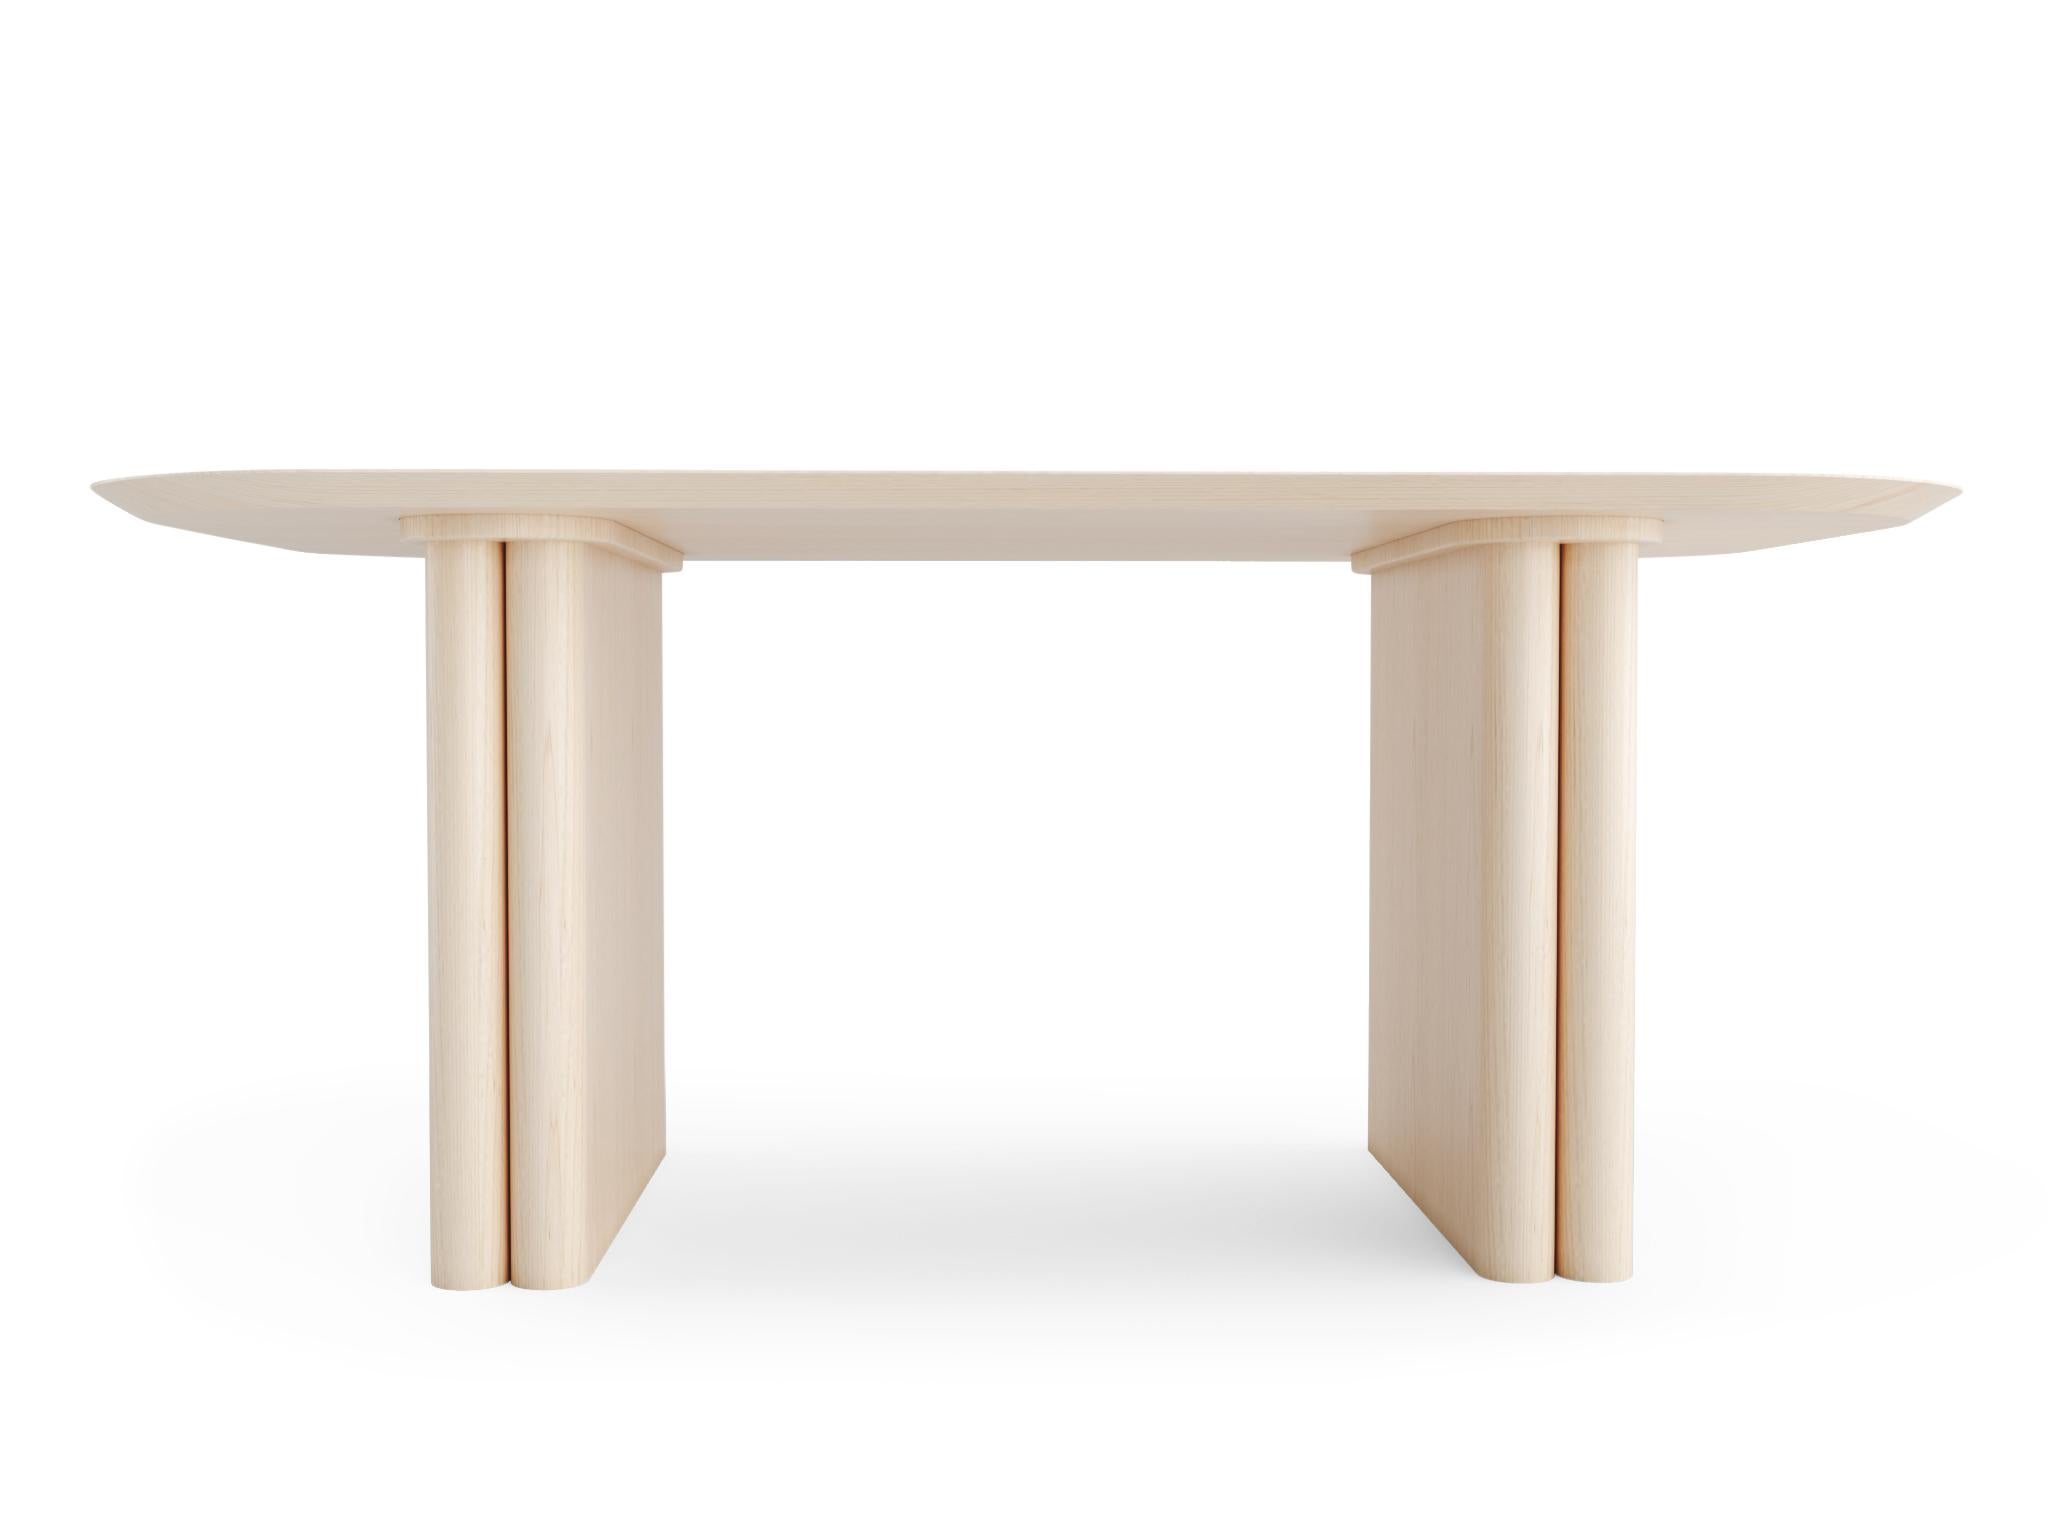 American Column Rectangular Table by Black Table Studio, Maple, REP by Tuleste Factory